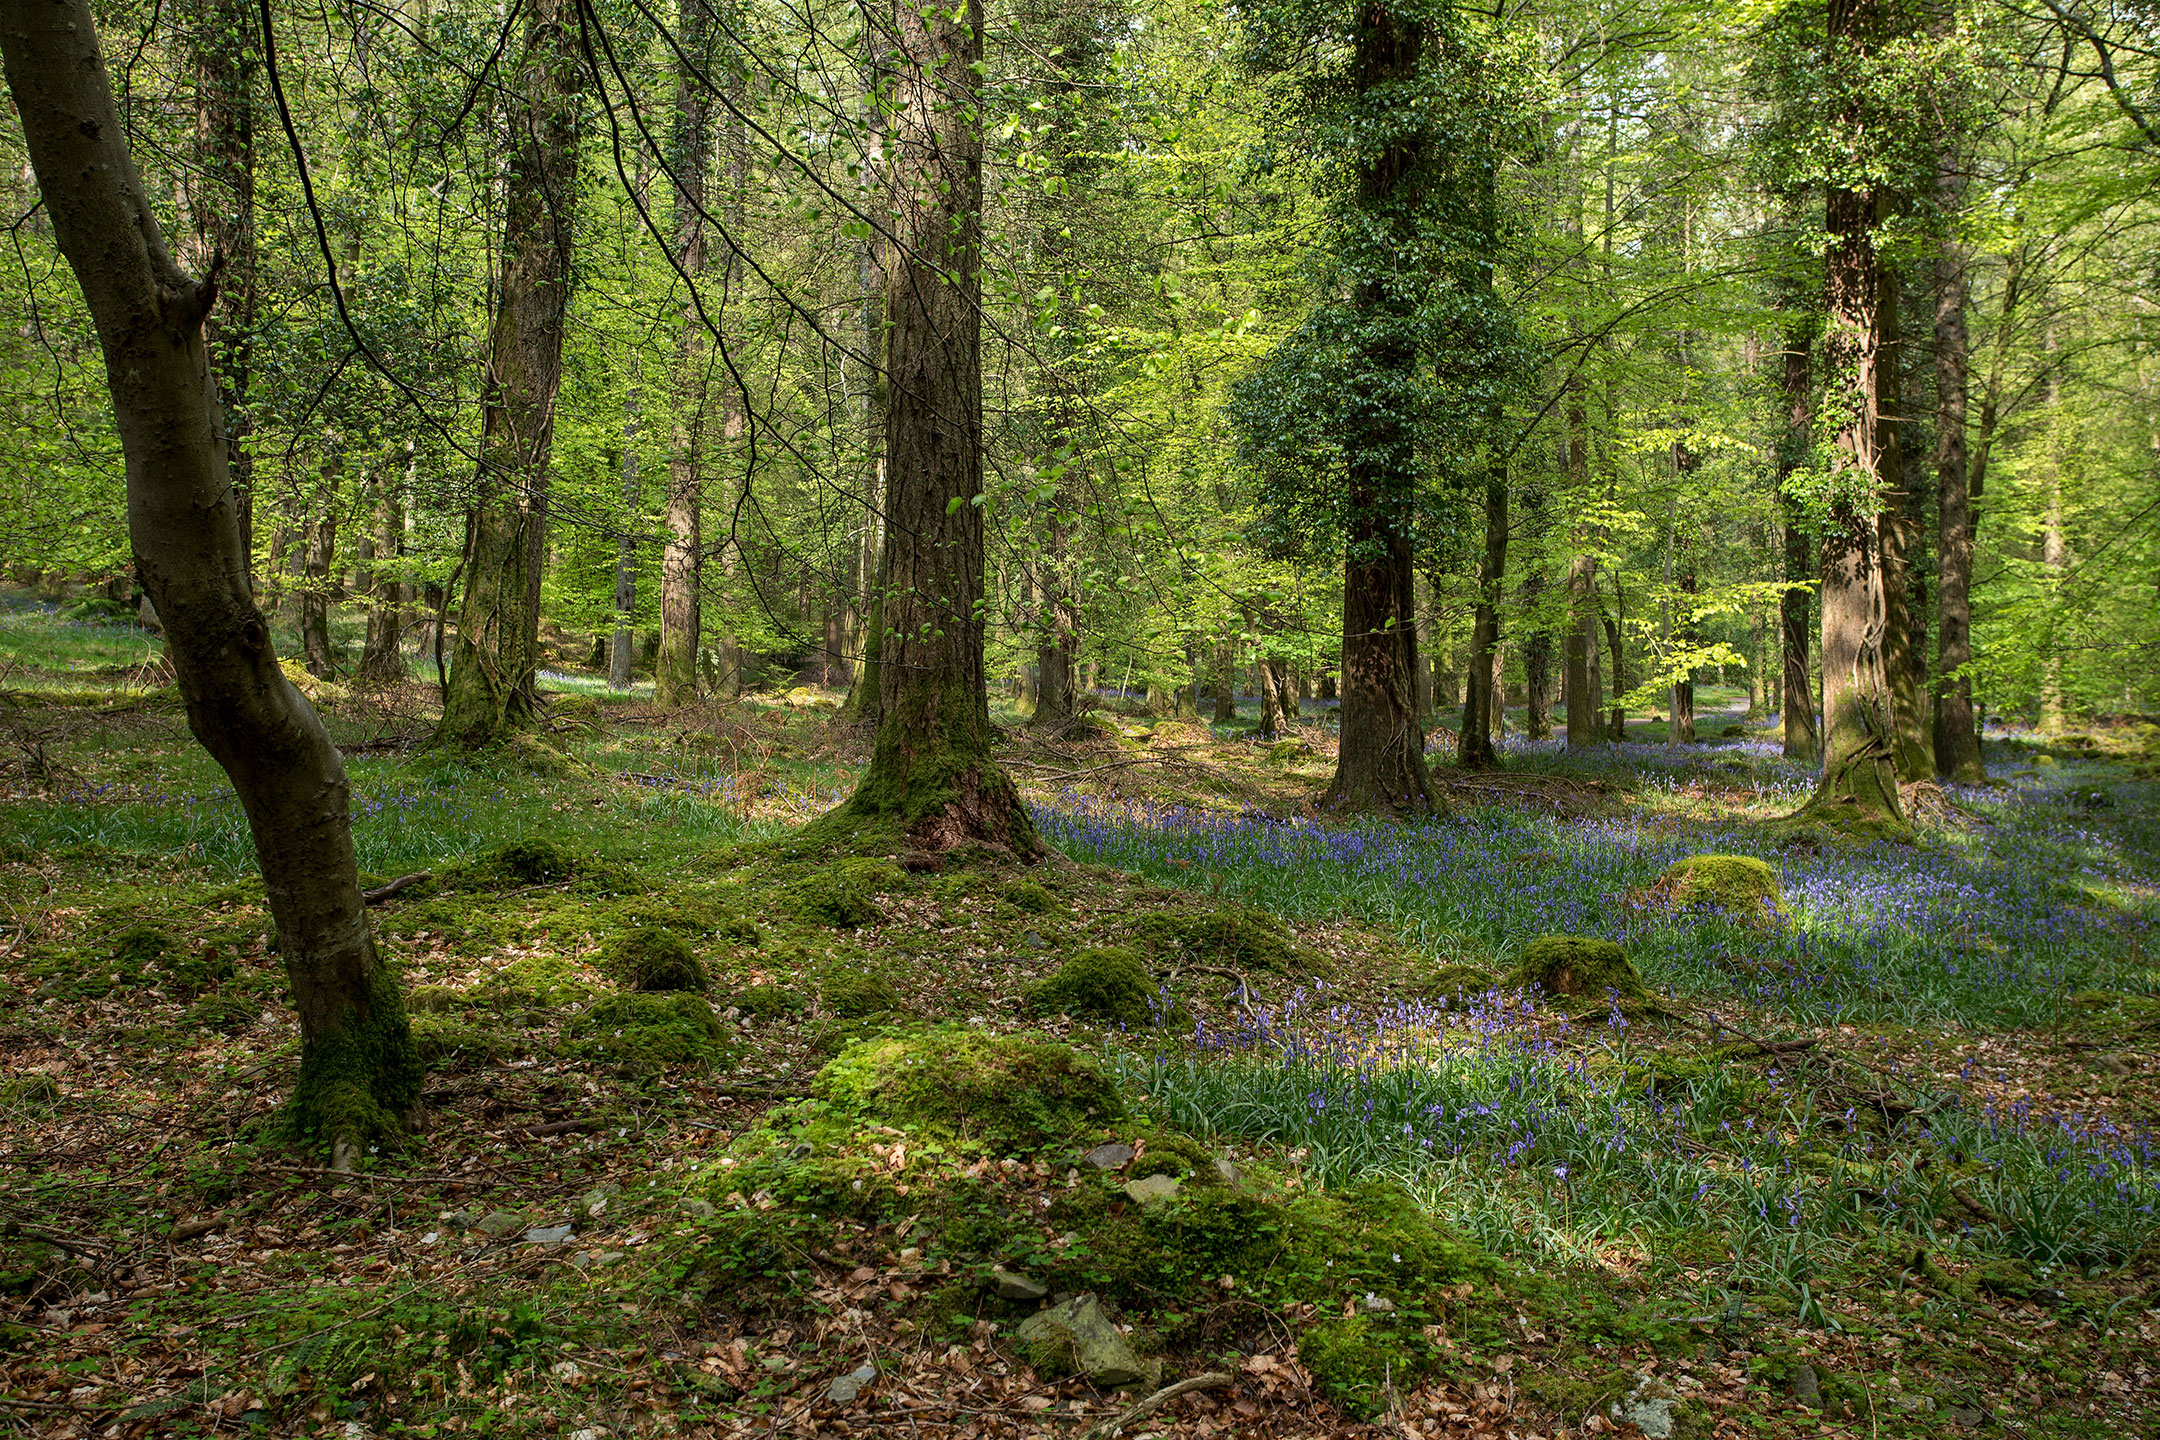 Bluebells lay amongst the moss covered trees in Tollymore Forest, County Down, Northern Ireland